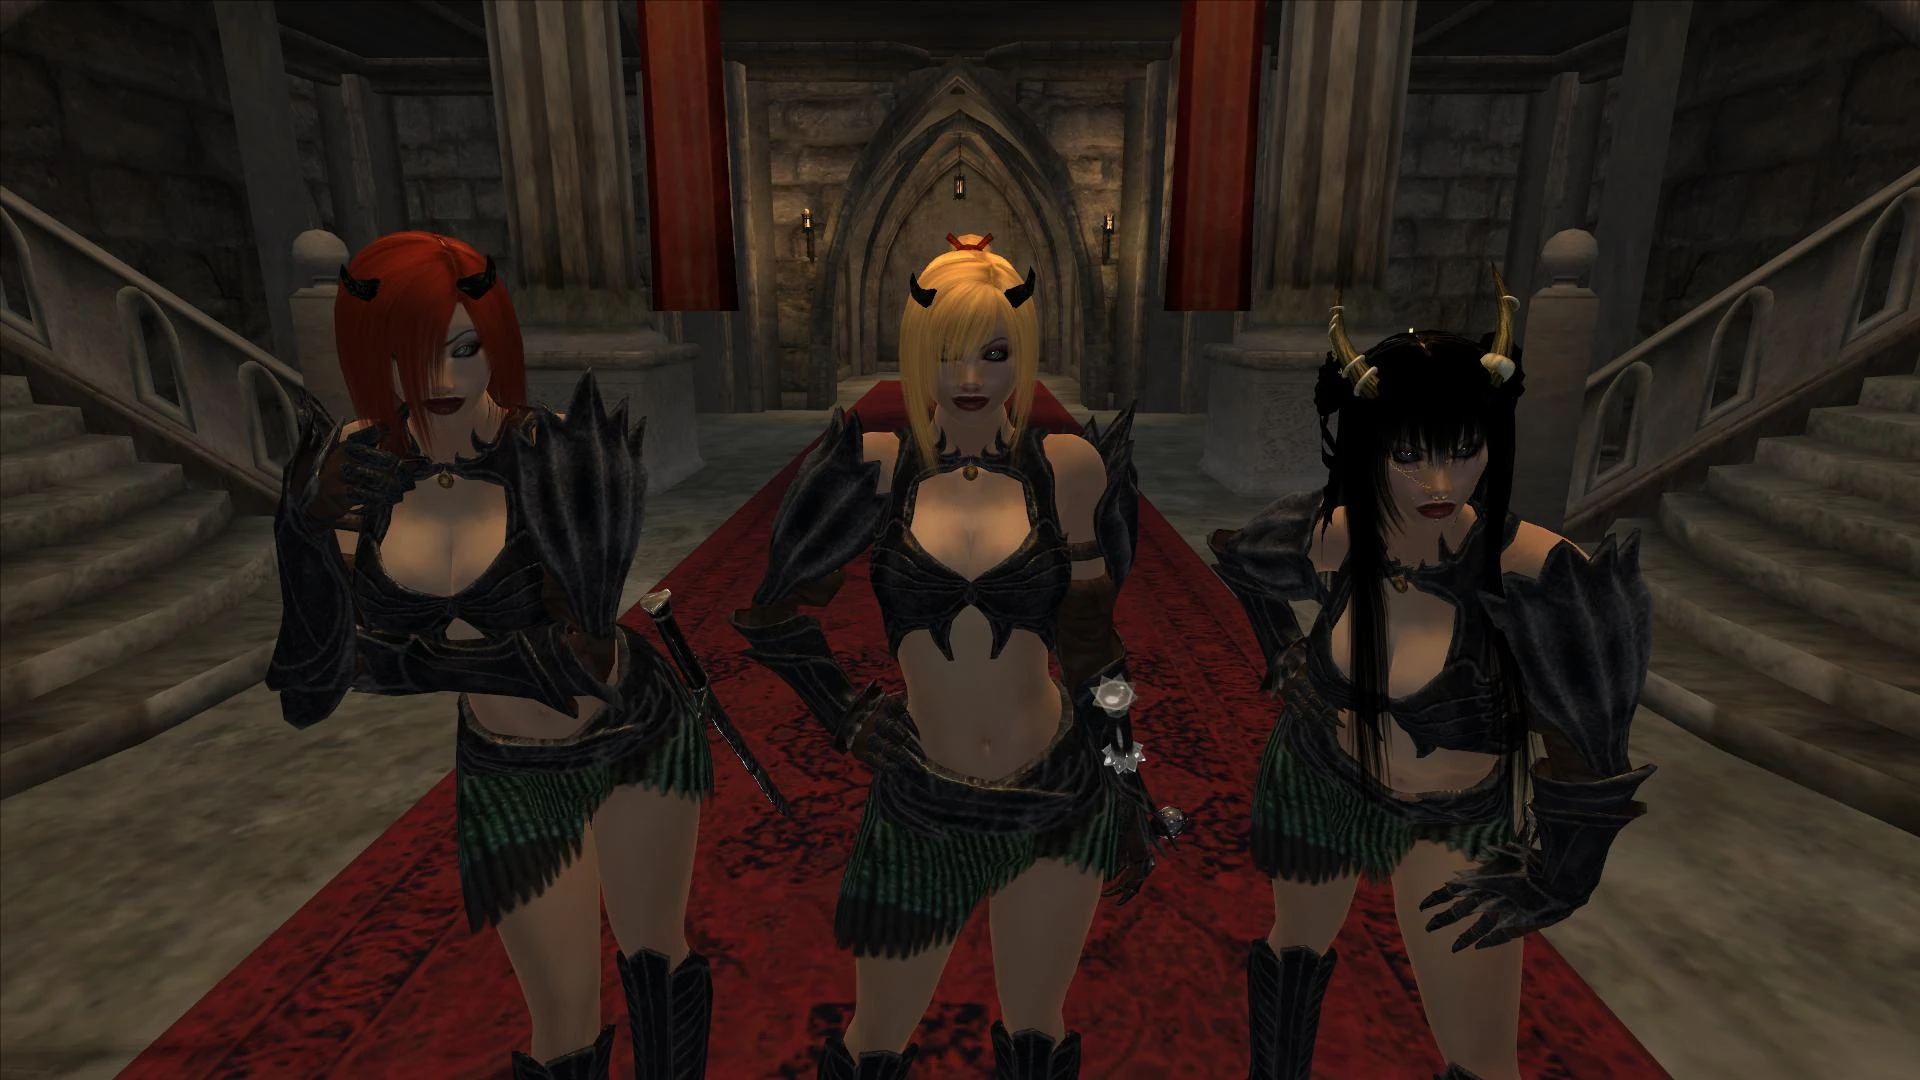 succubus race degraded at skyrim nexus mods and community.